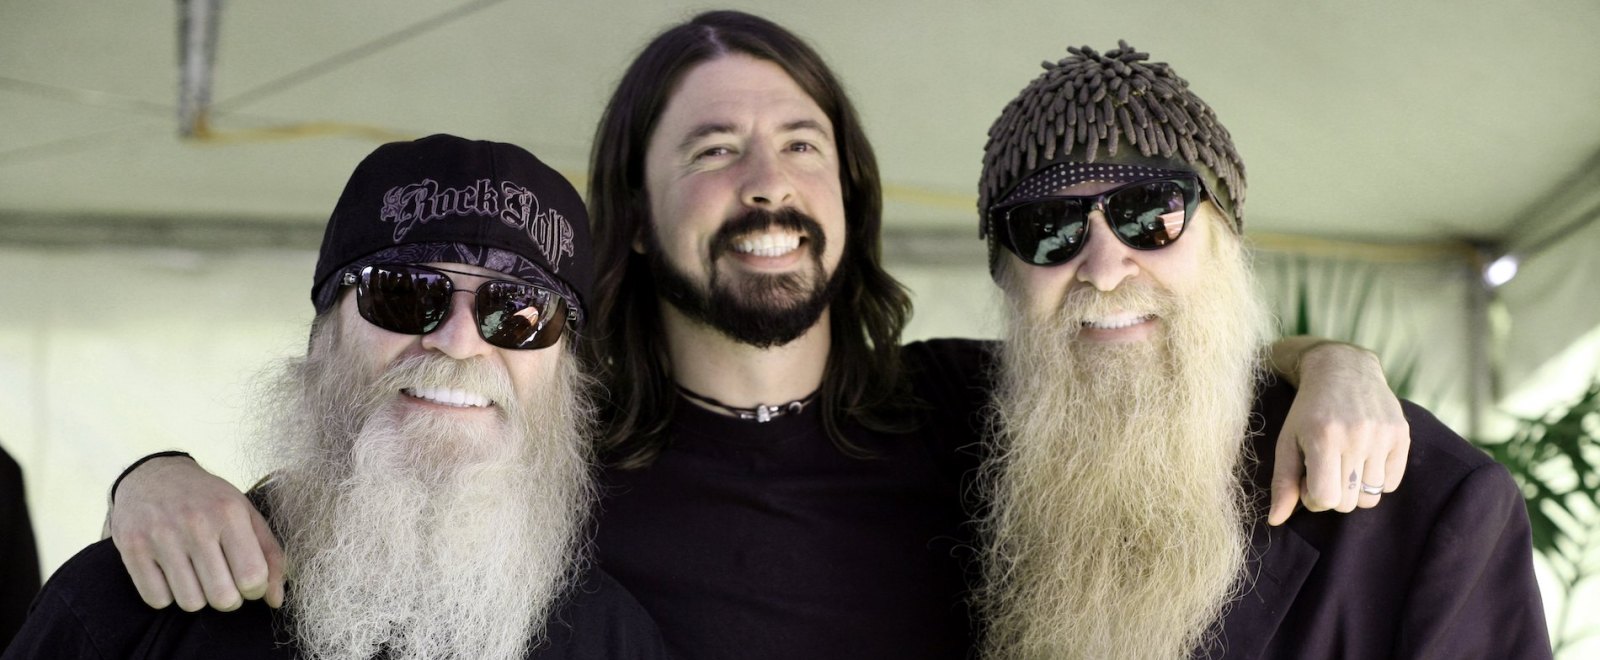 dave-grohl-zz-top-getty-full.jpg